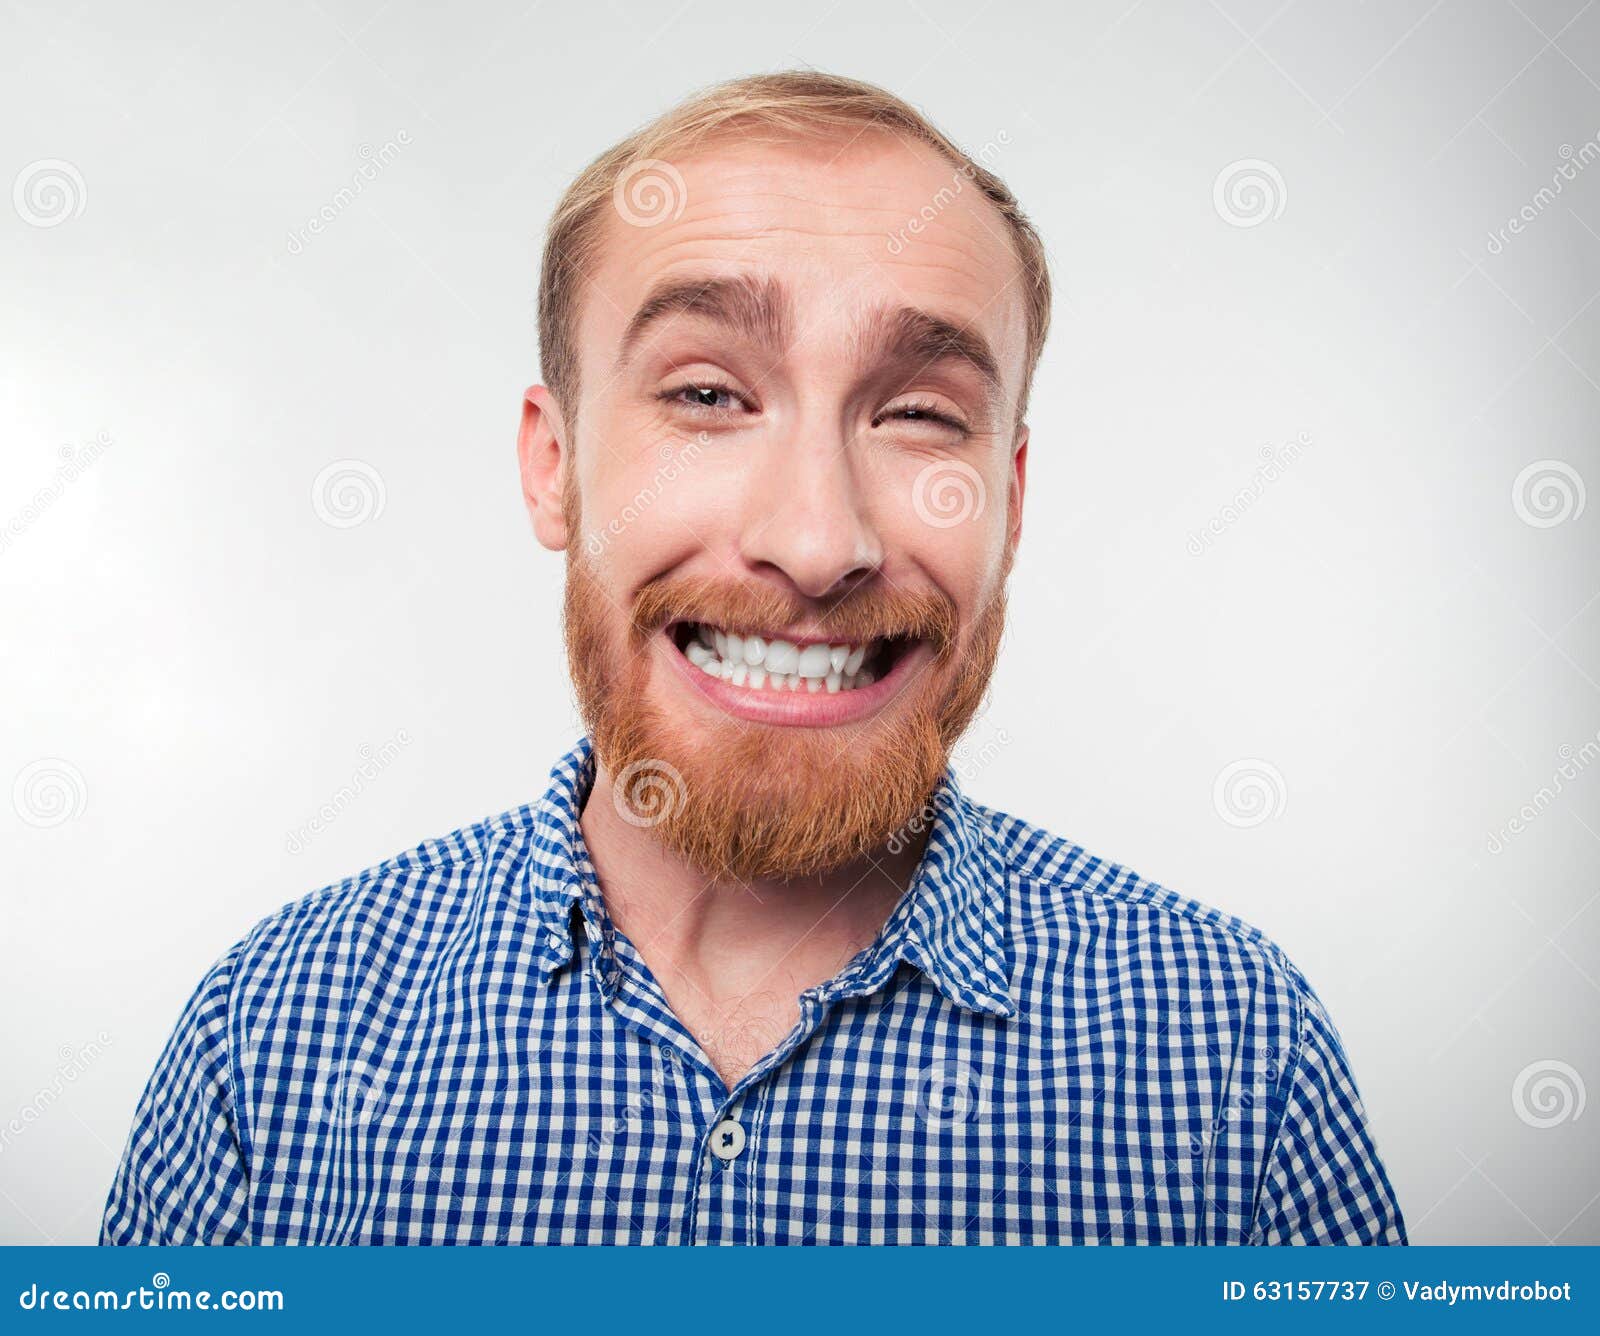 Portrait of a Funny Man Smiling Stock Image - Image of eyes, making:  63157737